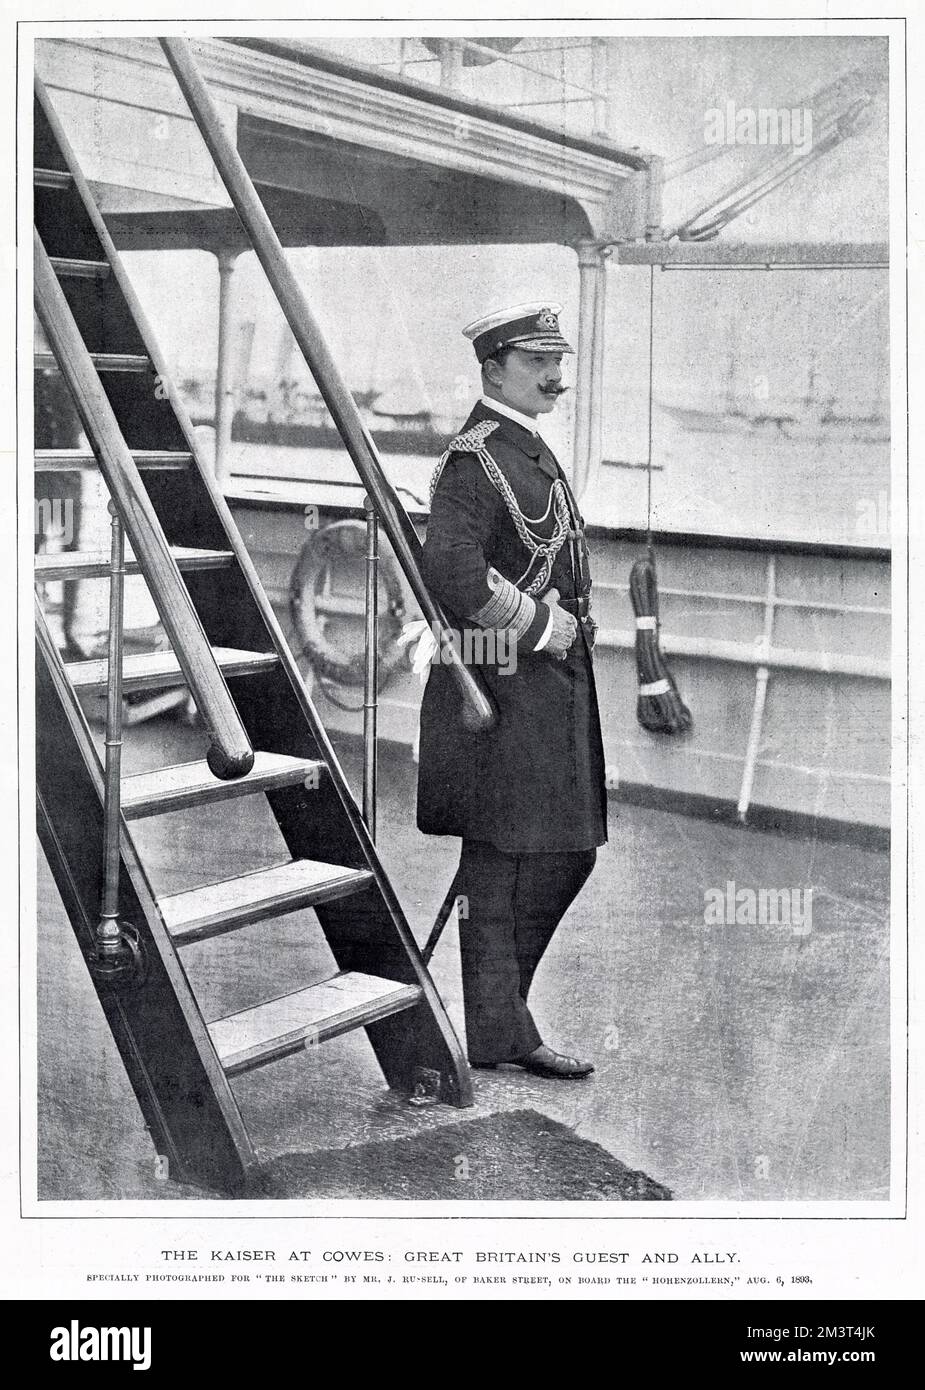 Wilhelm II (1859 - 1941), last German Emperor (German: Kaiser) and King of Prussia, reigning from 15 June 1888 until his abdication on 9 November 1918. Photograph showing Wilhelm II (Kaiser) on board the 'Hohenzollern' as a guest to Britain at the annual Cowes Week Regatta. Stock Photo